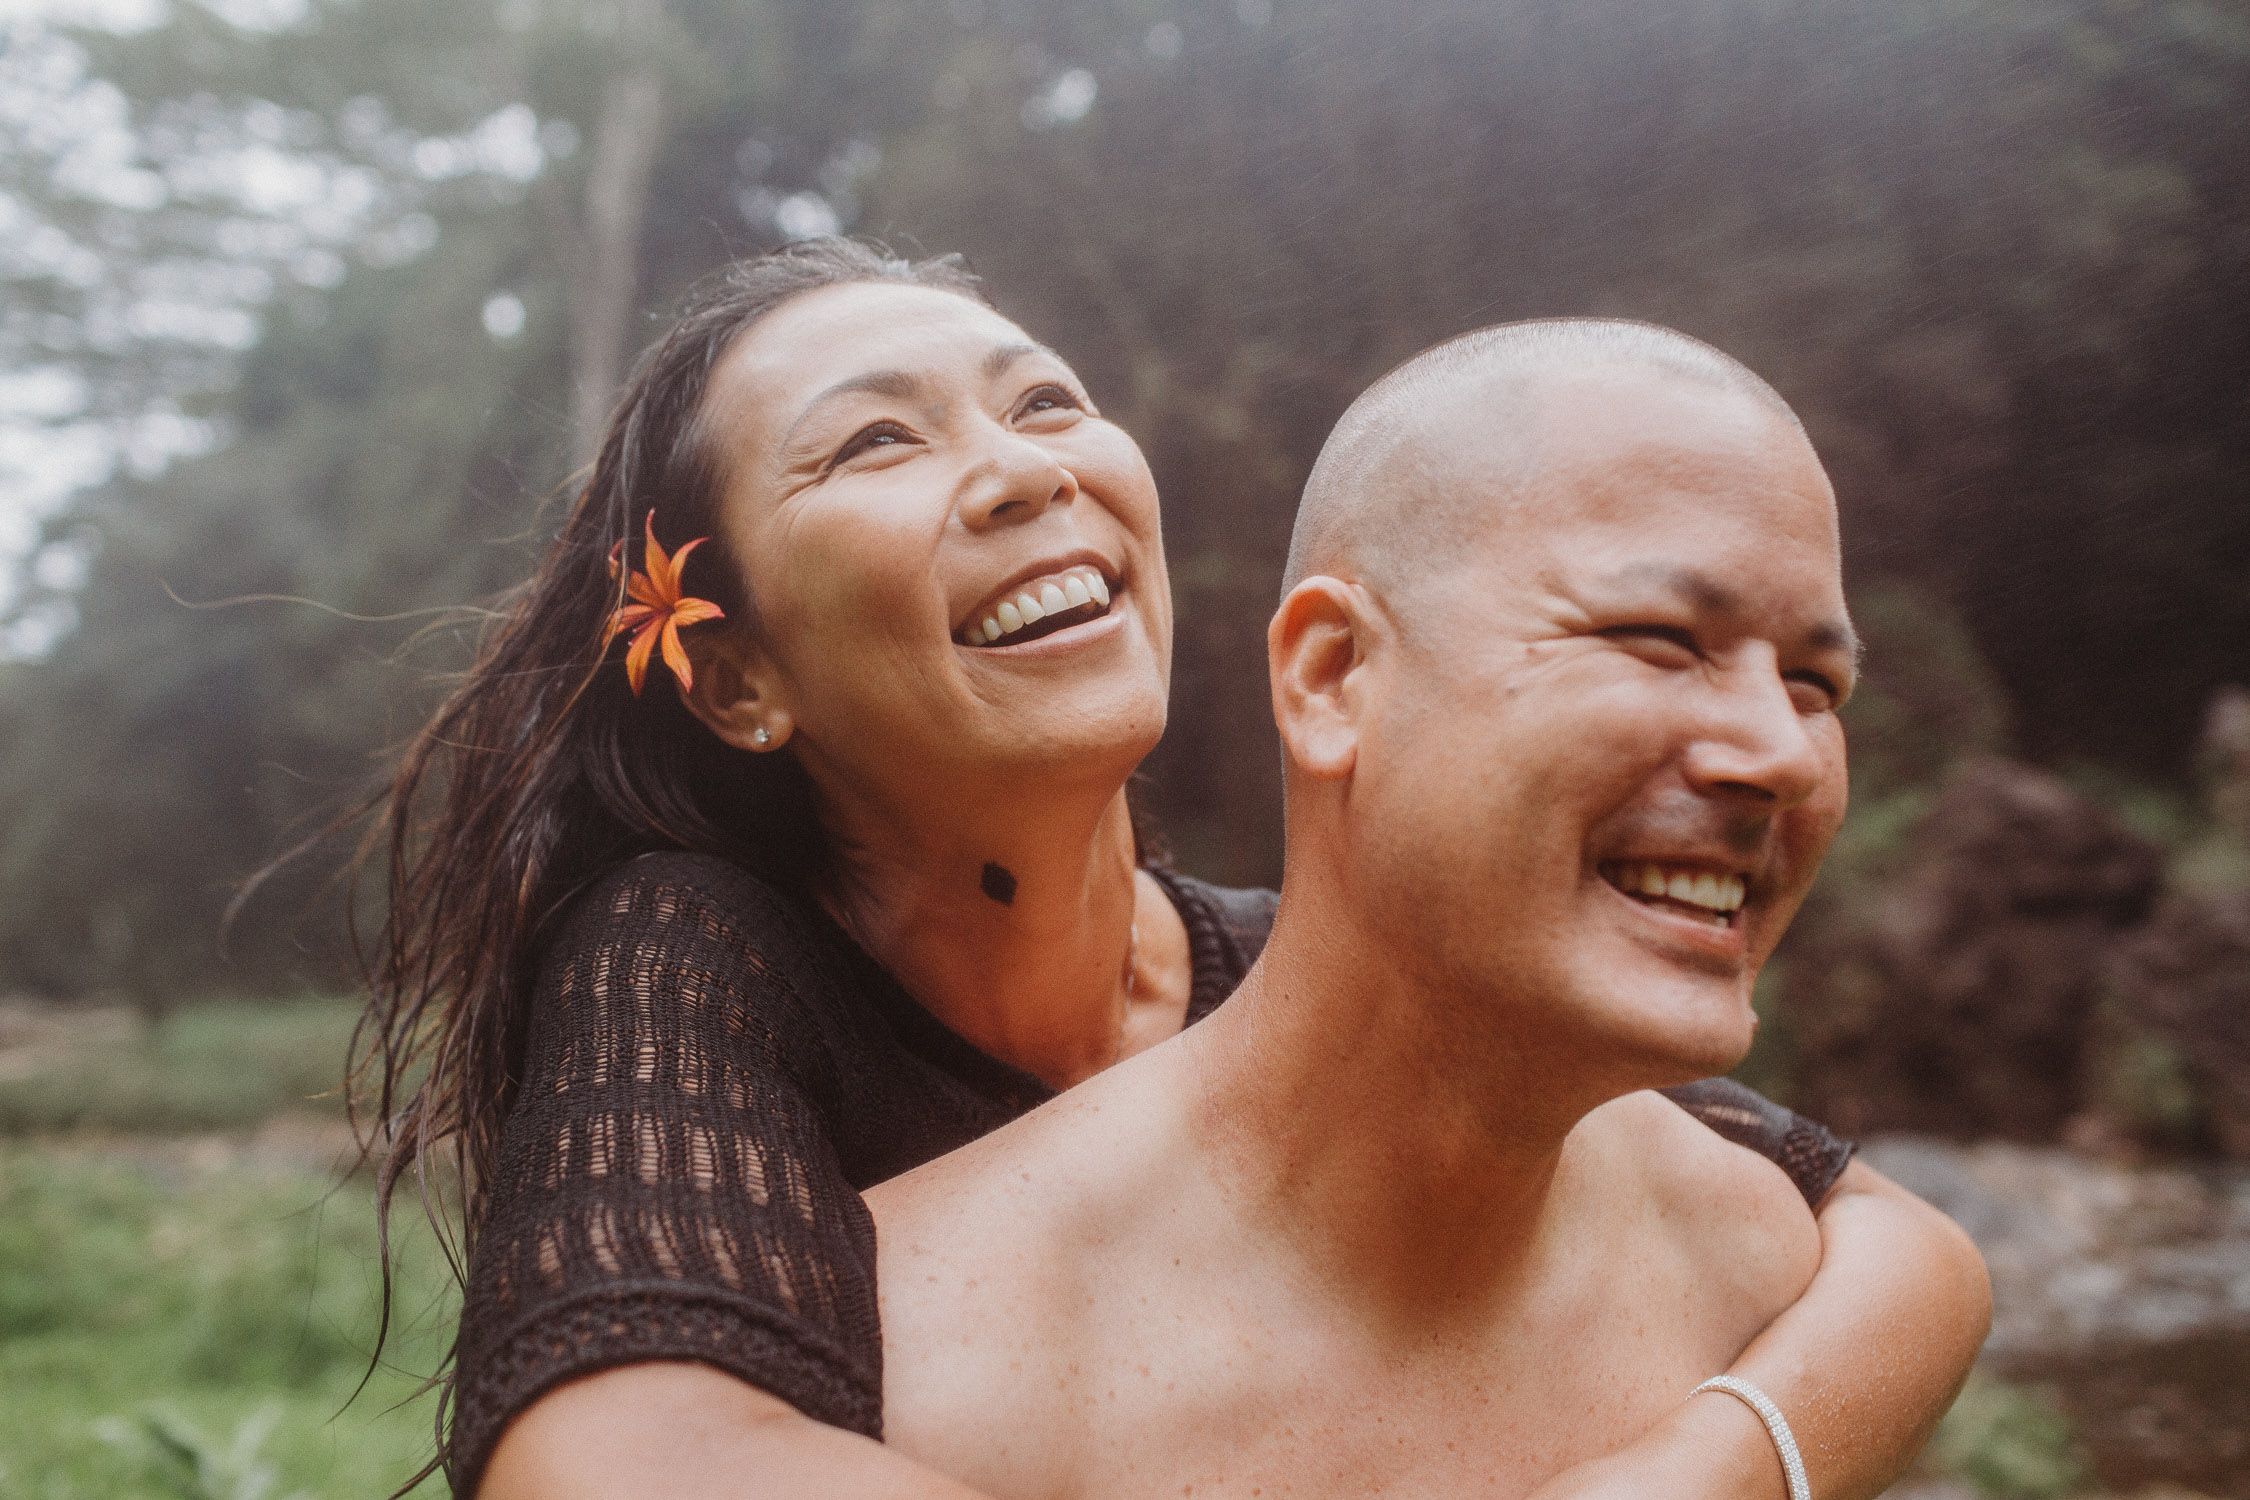 Woman goes for a piggyback ride on her fiance as they smile in the Hawaii rain during their Hawaii engagement photoshoot by Liz Koston.